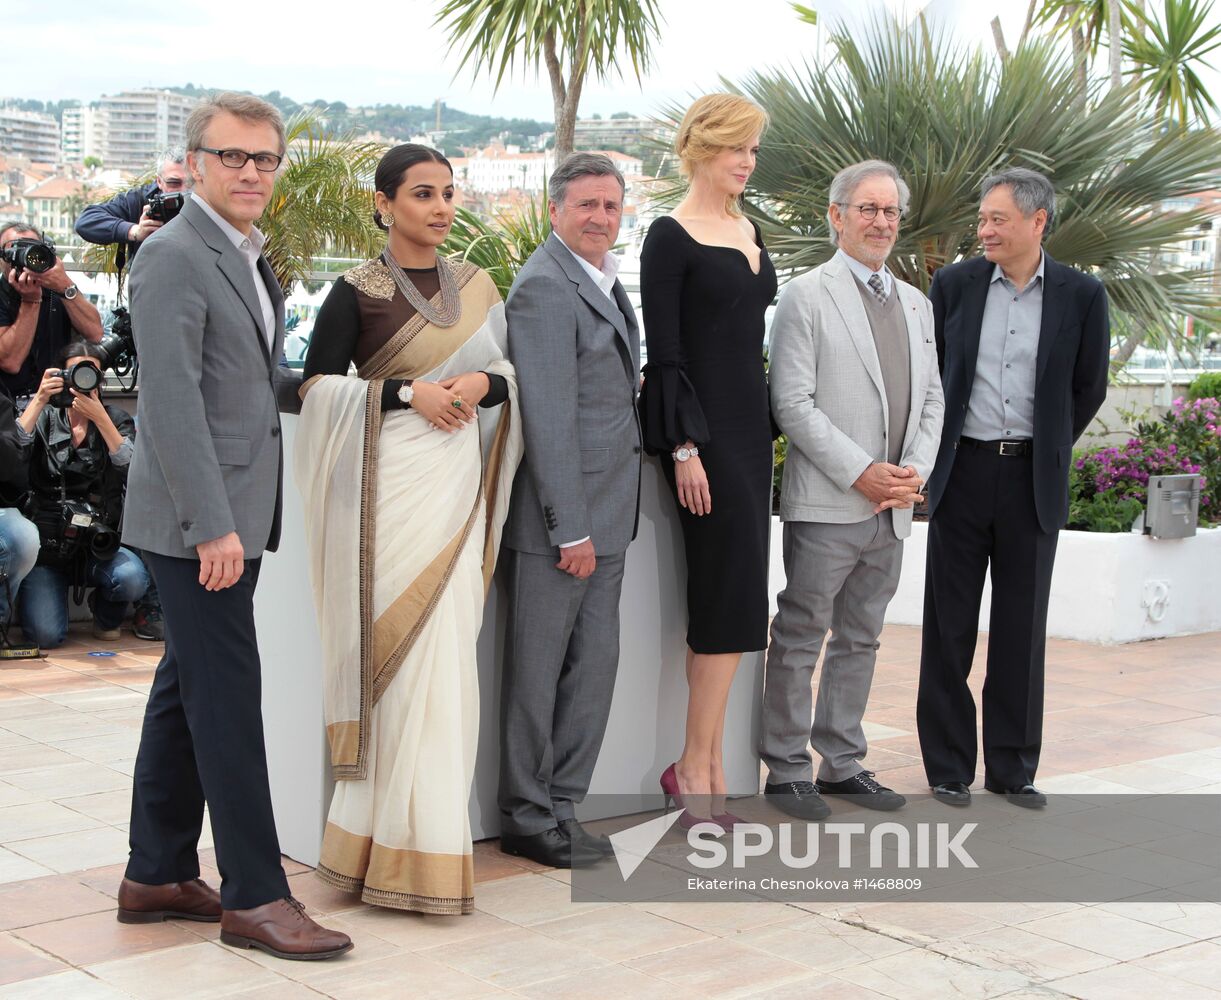 Photo shoot with 66th Cannes Festival jury